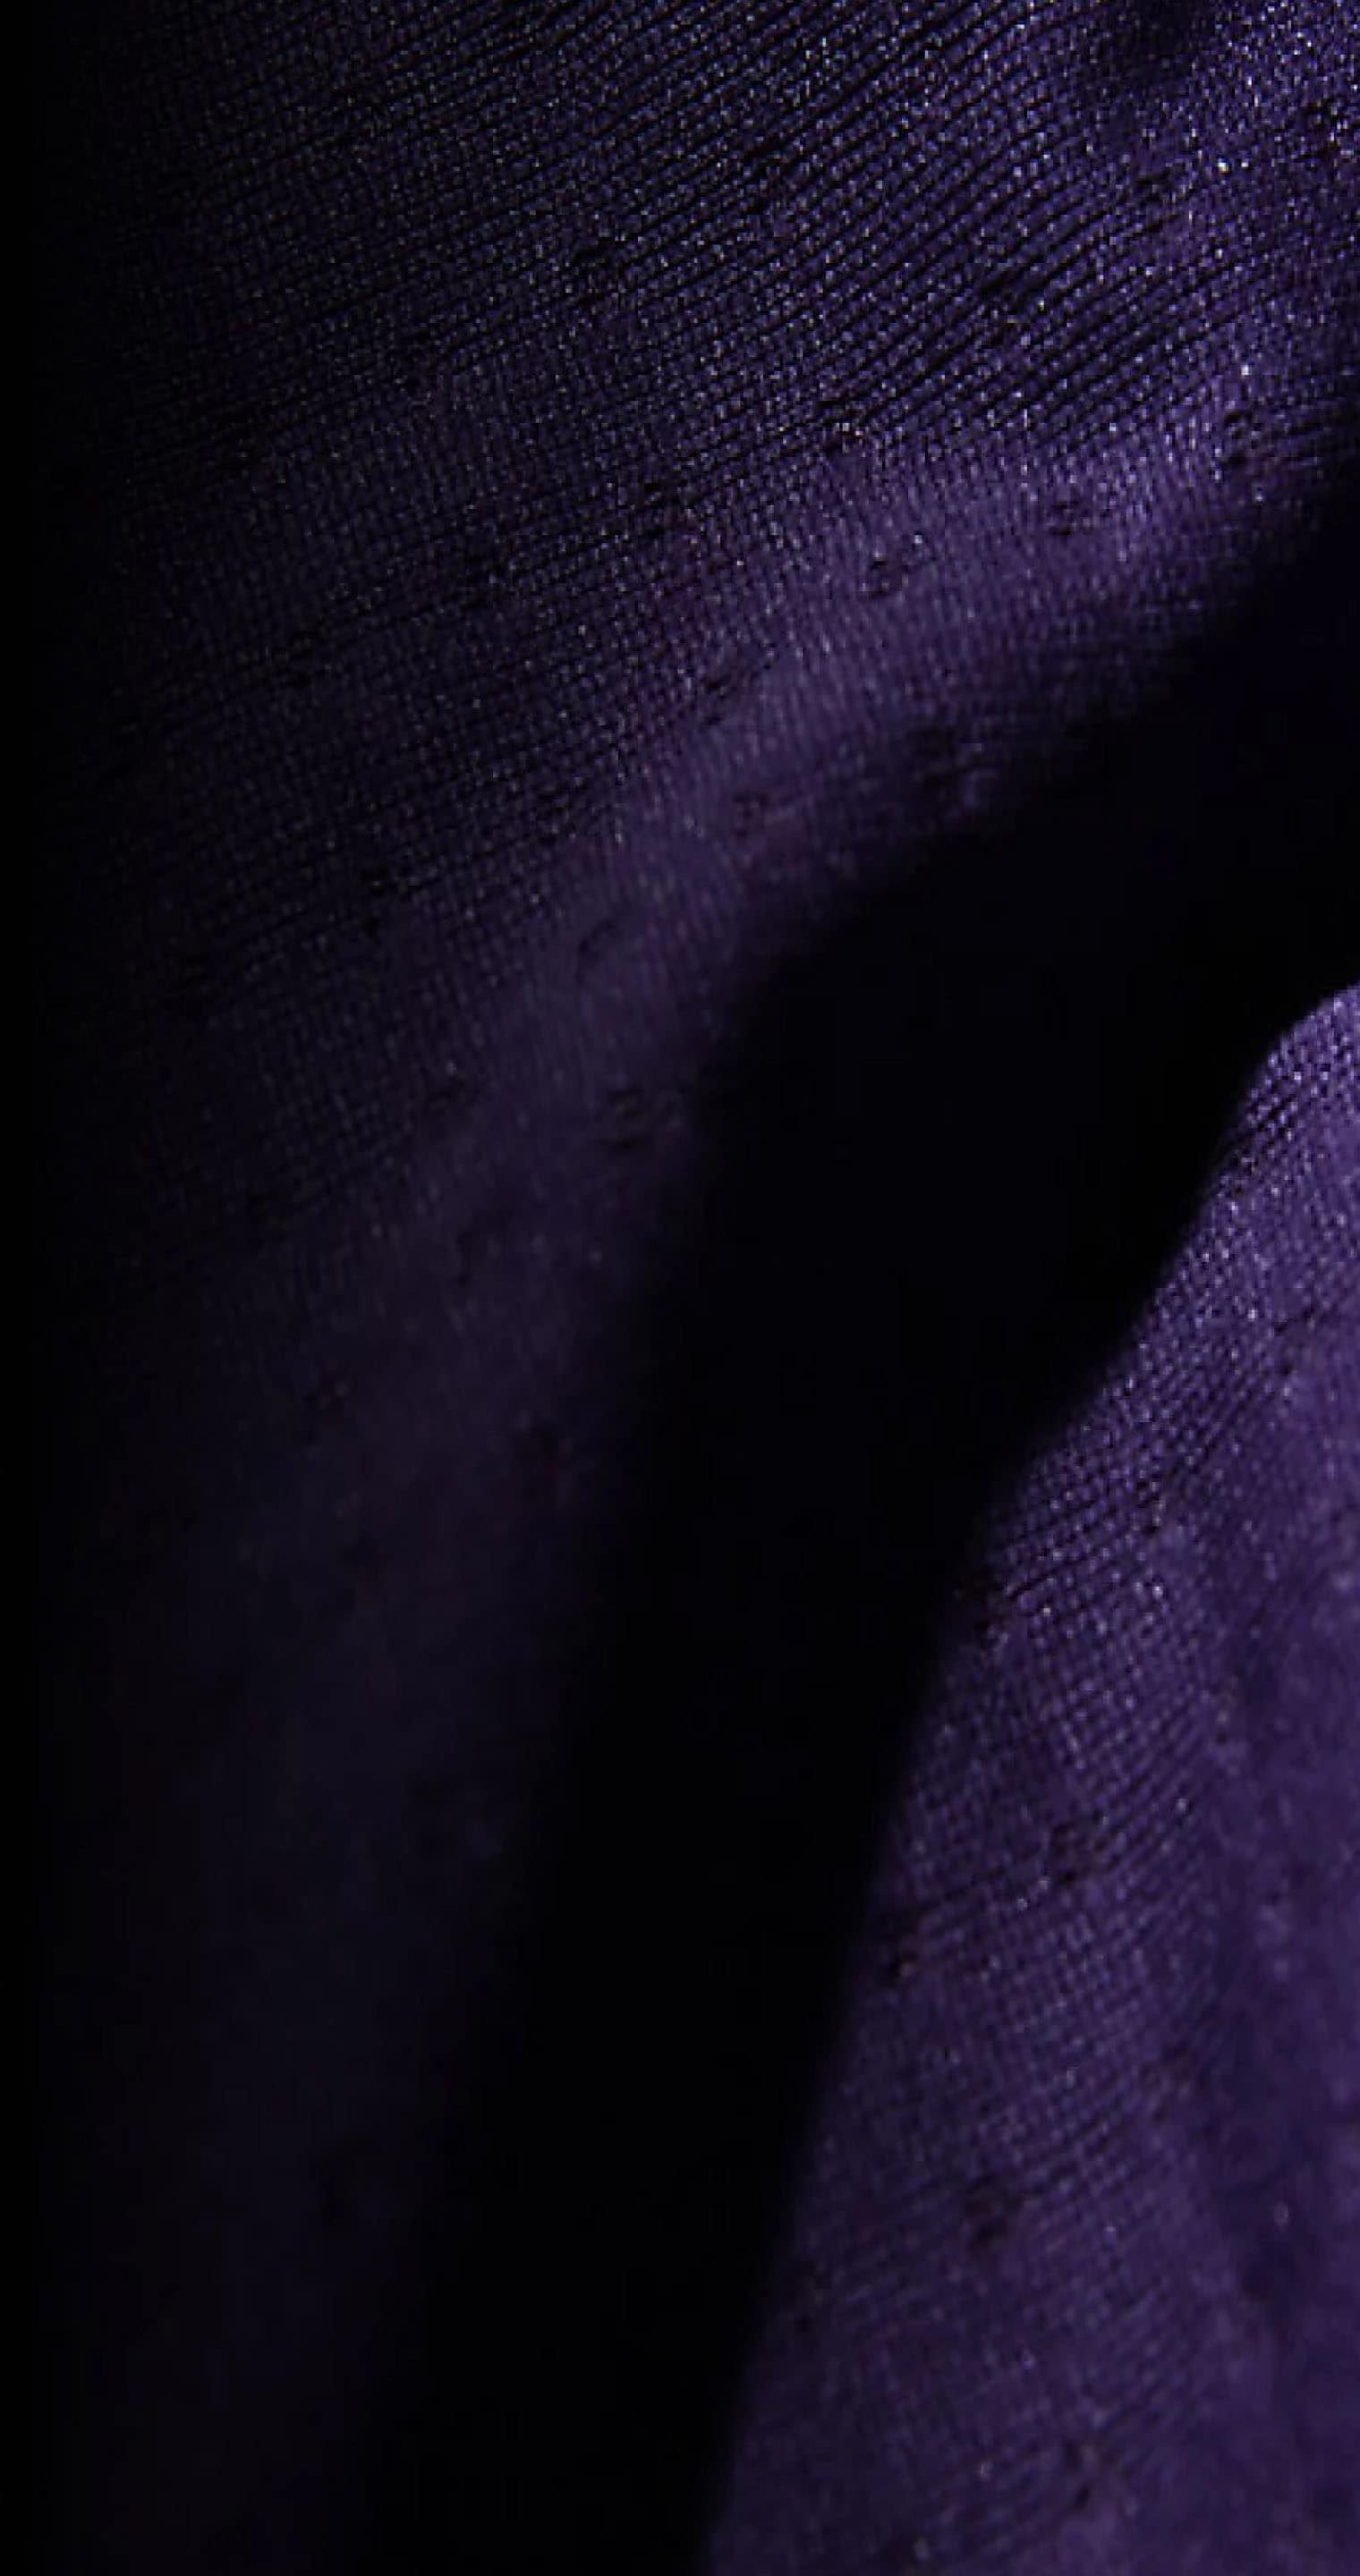 An extreme close-up of purple DotKnit fabric. 